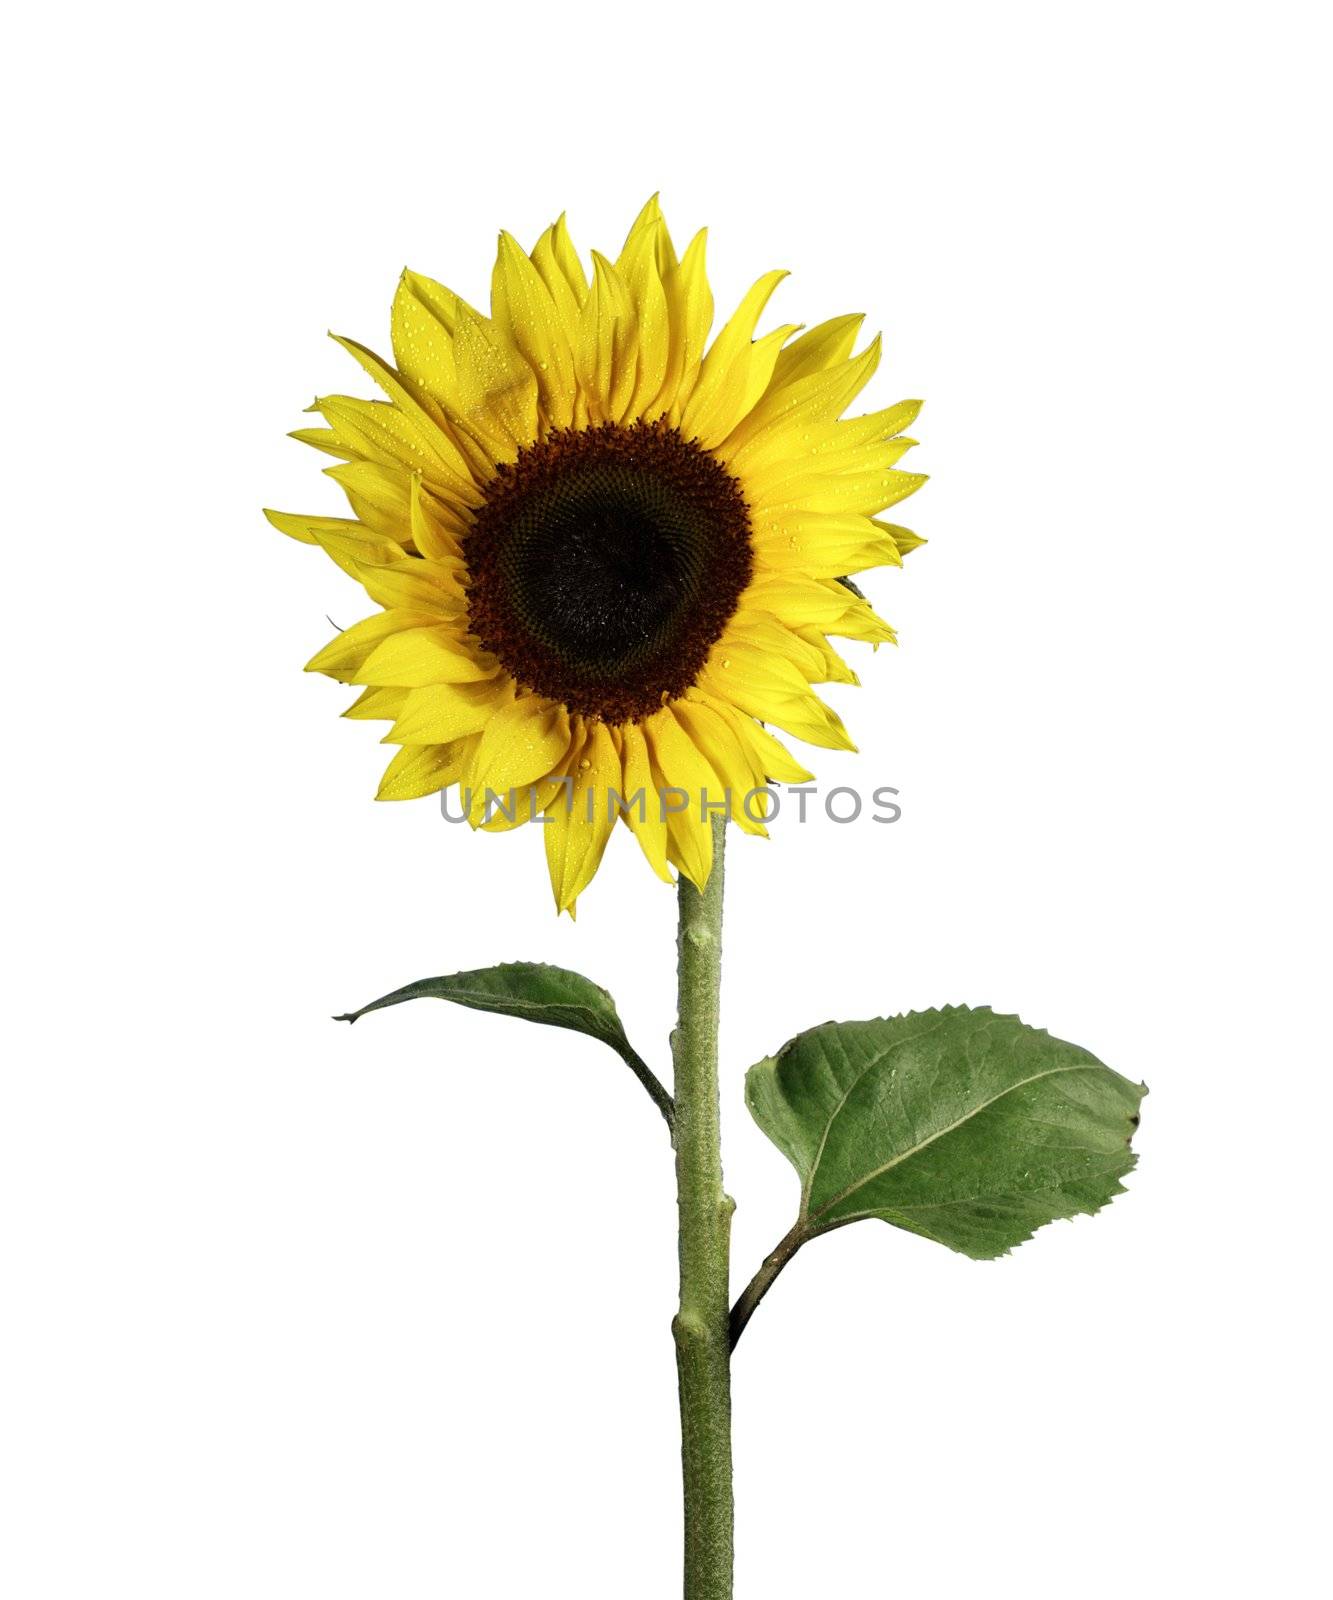 sunflower with green leaves. Isolated over white background

